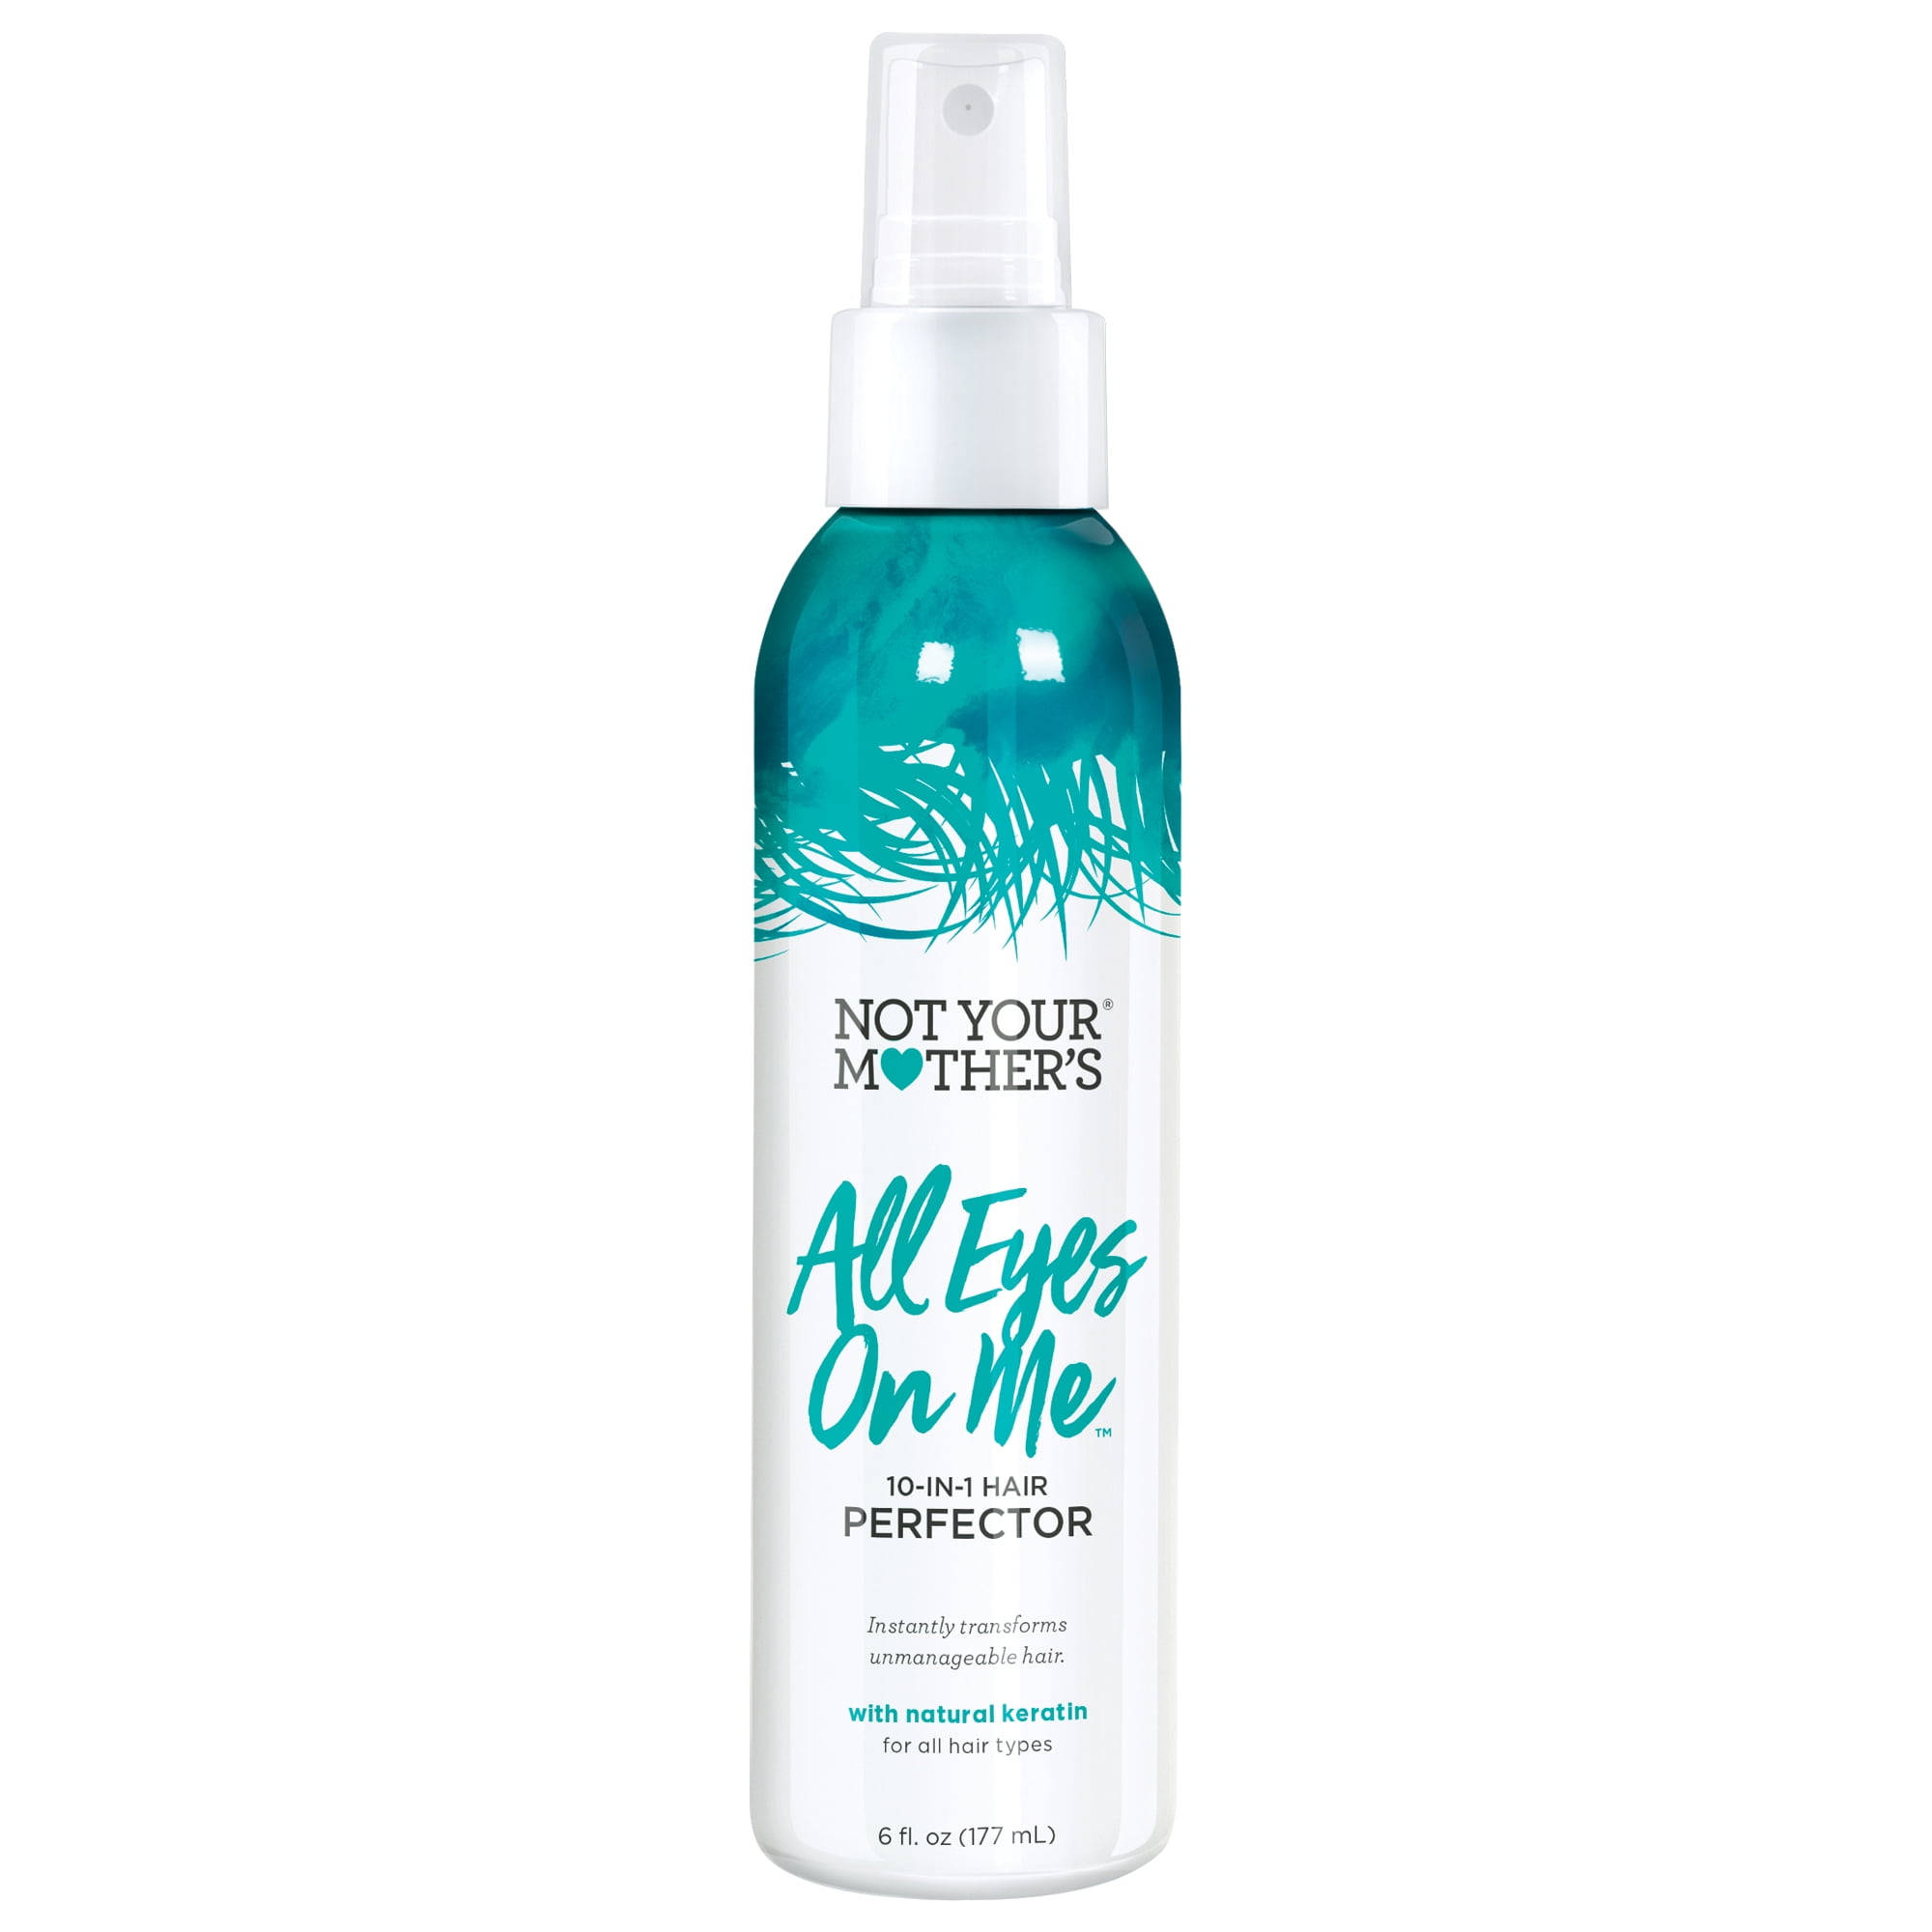 Not Your Mother's All Eyes On Me 10-in-1 Hair Perfector, 6 oz